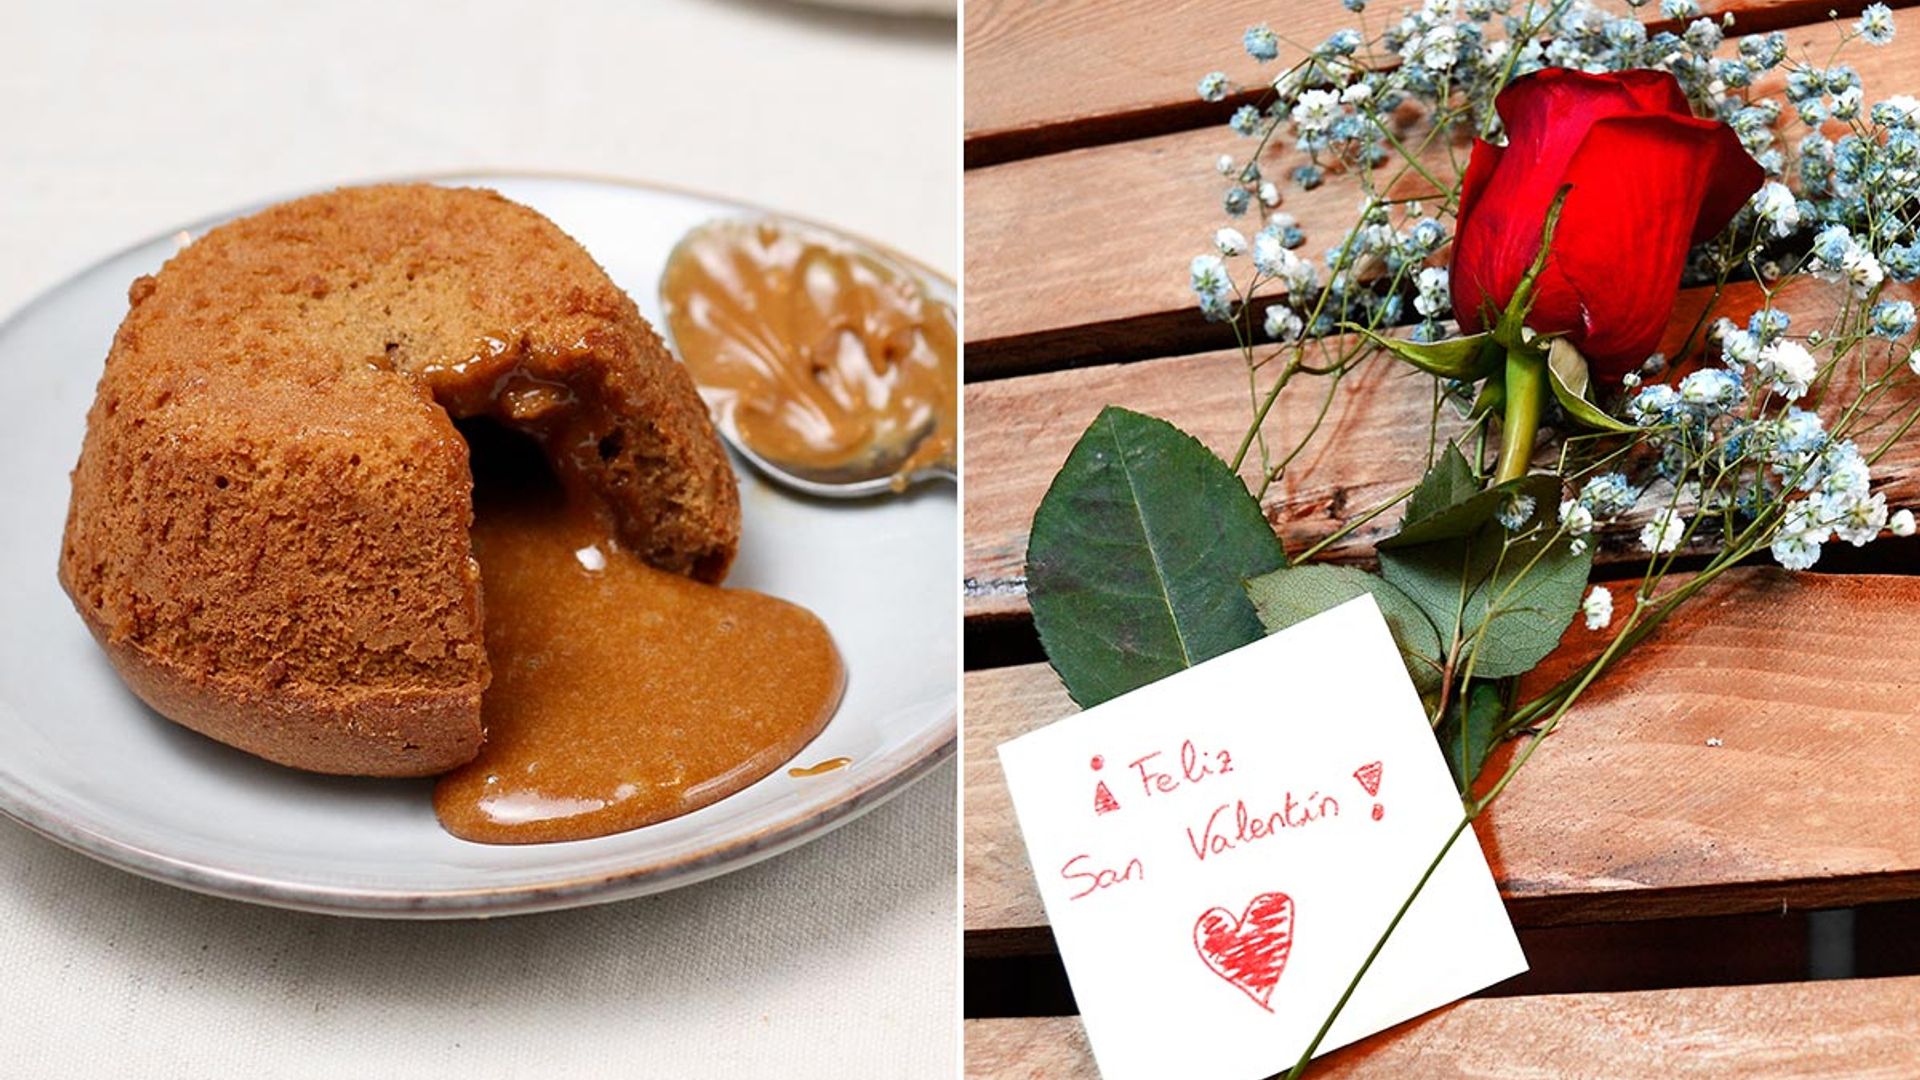 Be the dream Valentine with this Biscoff Fondant dessert – see recipe